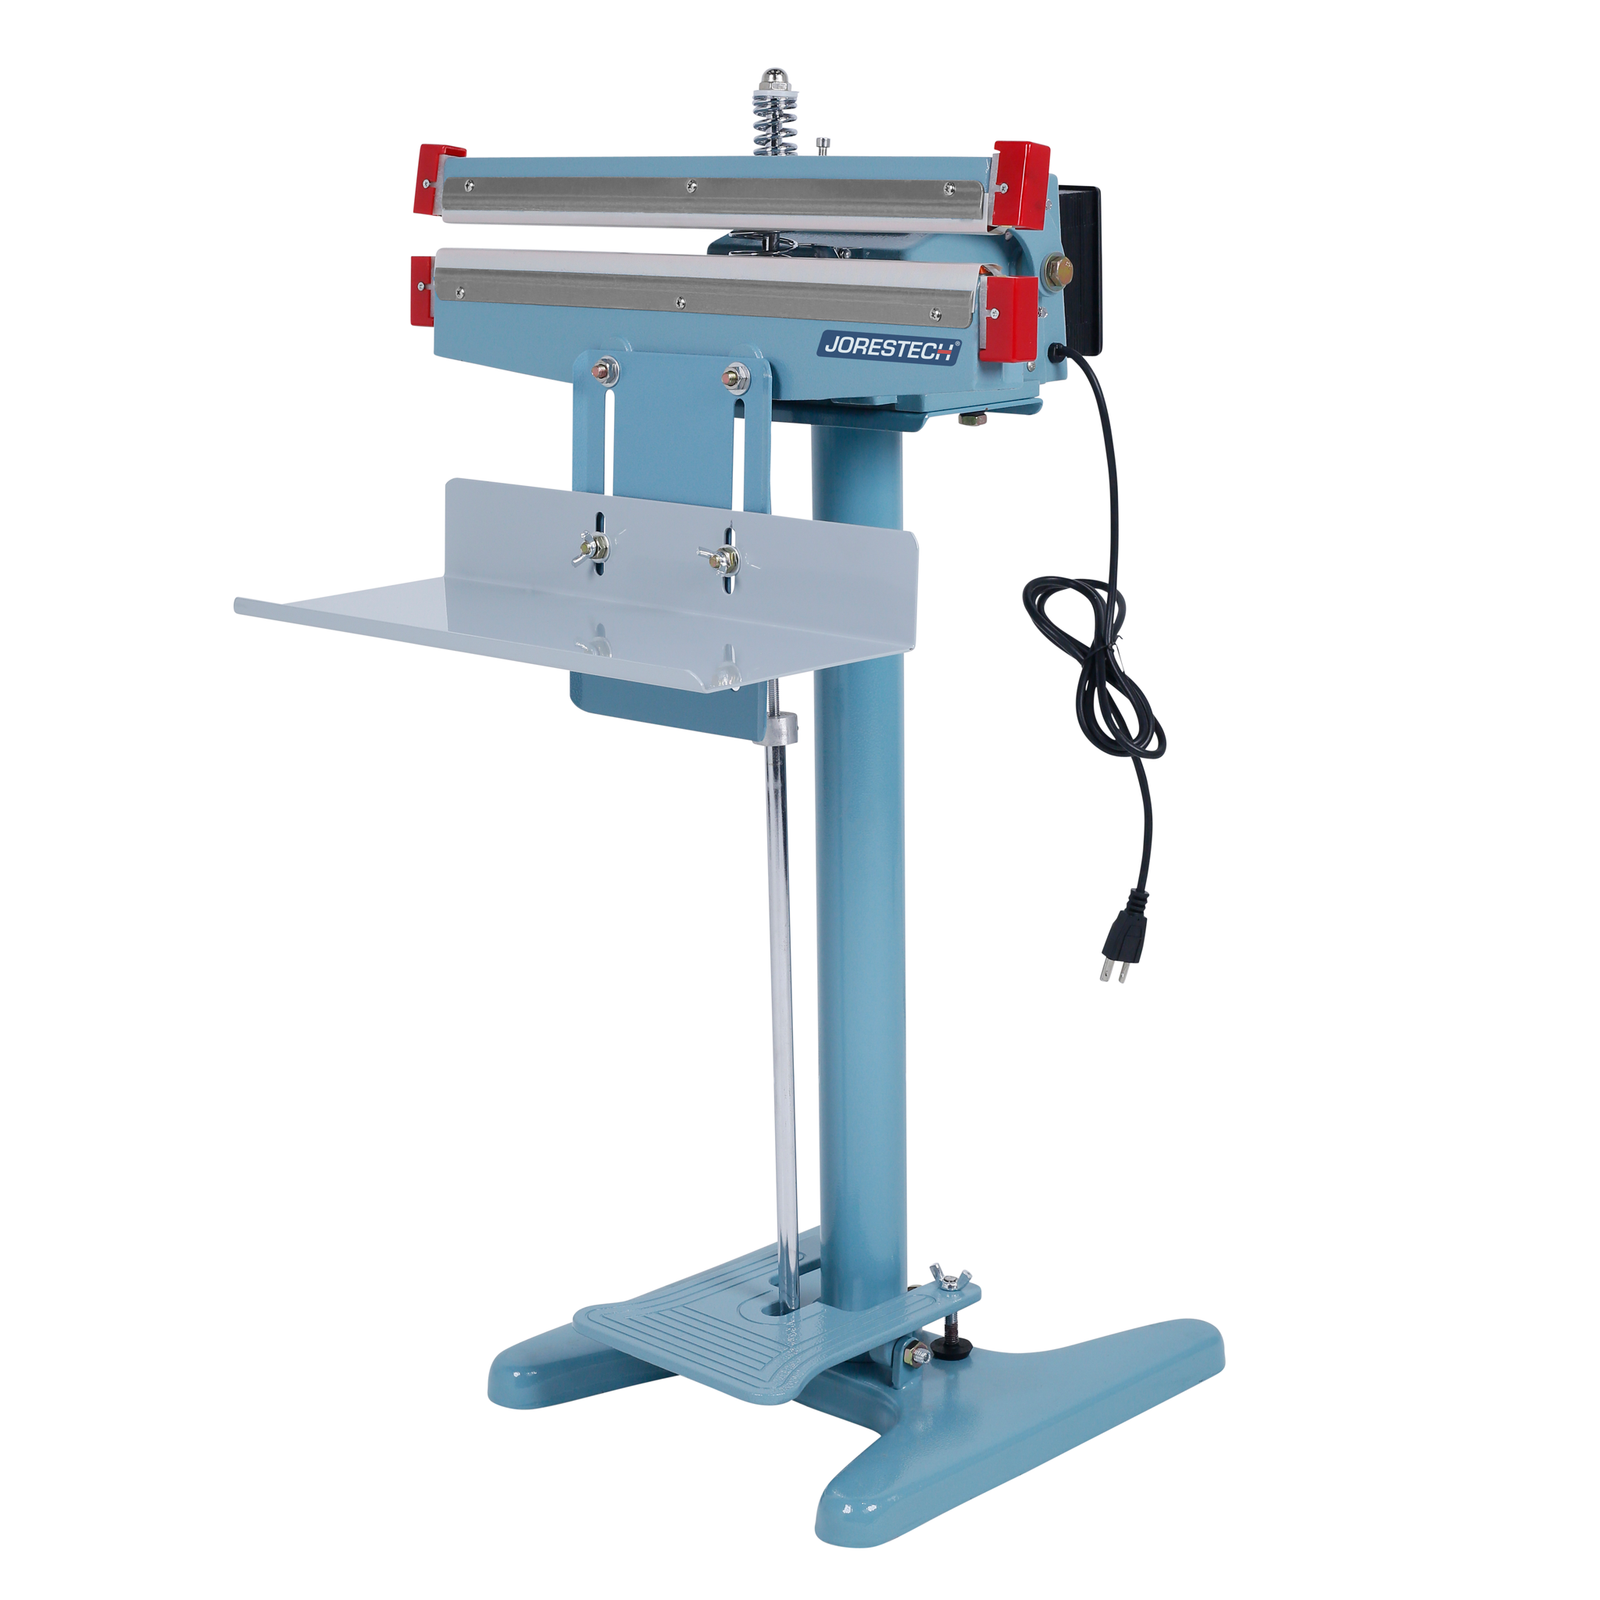 Double heat foot impulse bag sealer. Bag sealer is shown with open double sealing jaw and JORES TECHNOLOGIES® logo.